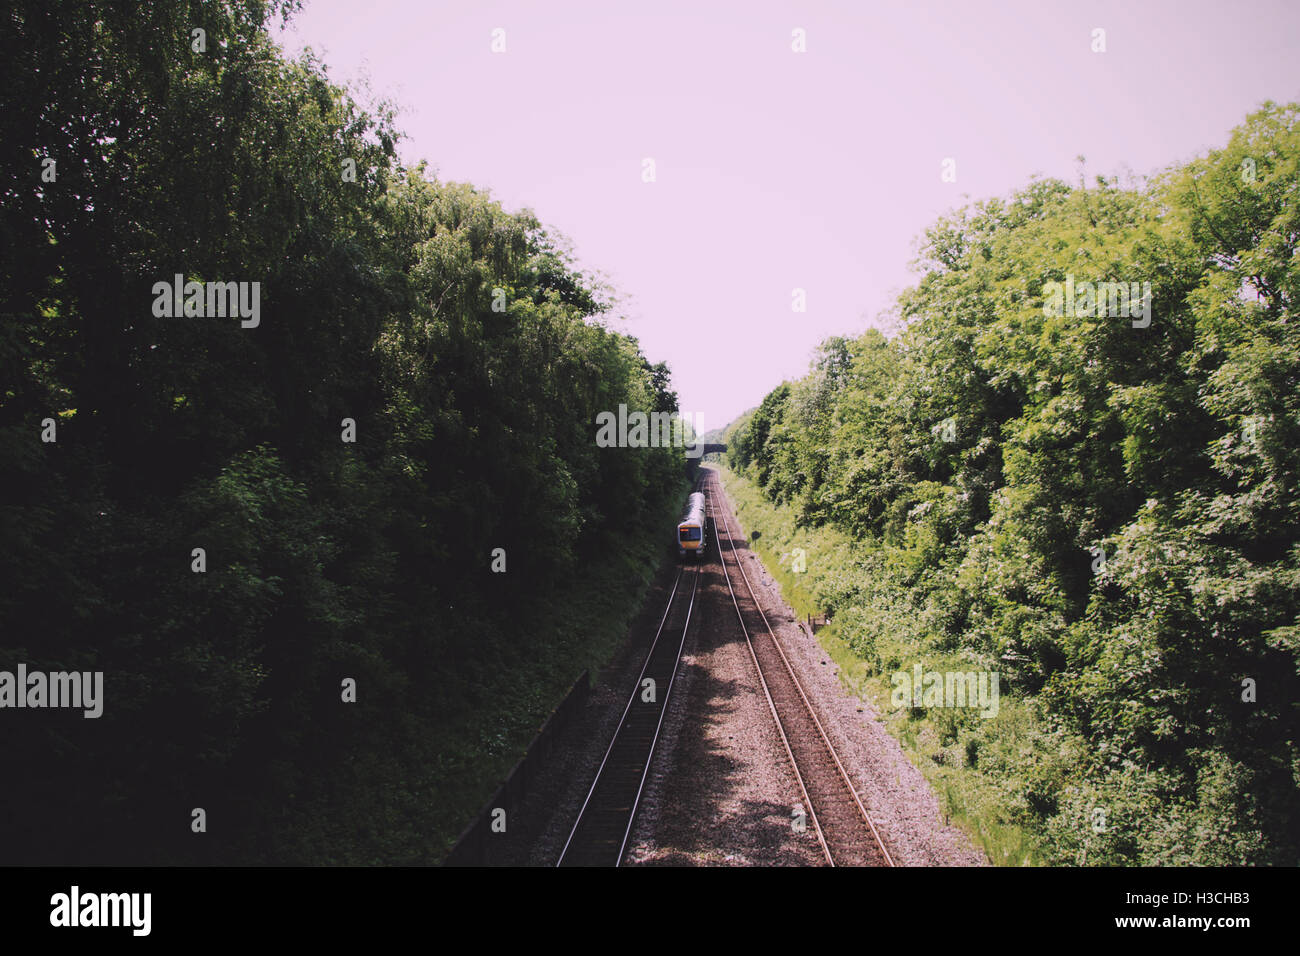 View over the railway line with trees on each side Vintage Retro Filter. Stock Photo